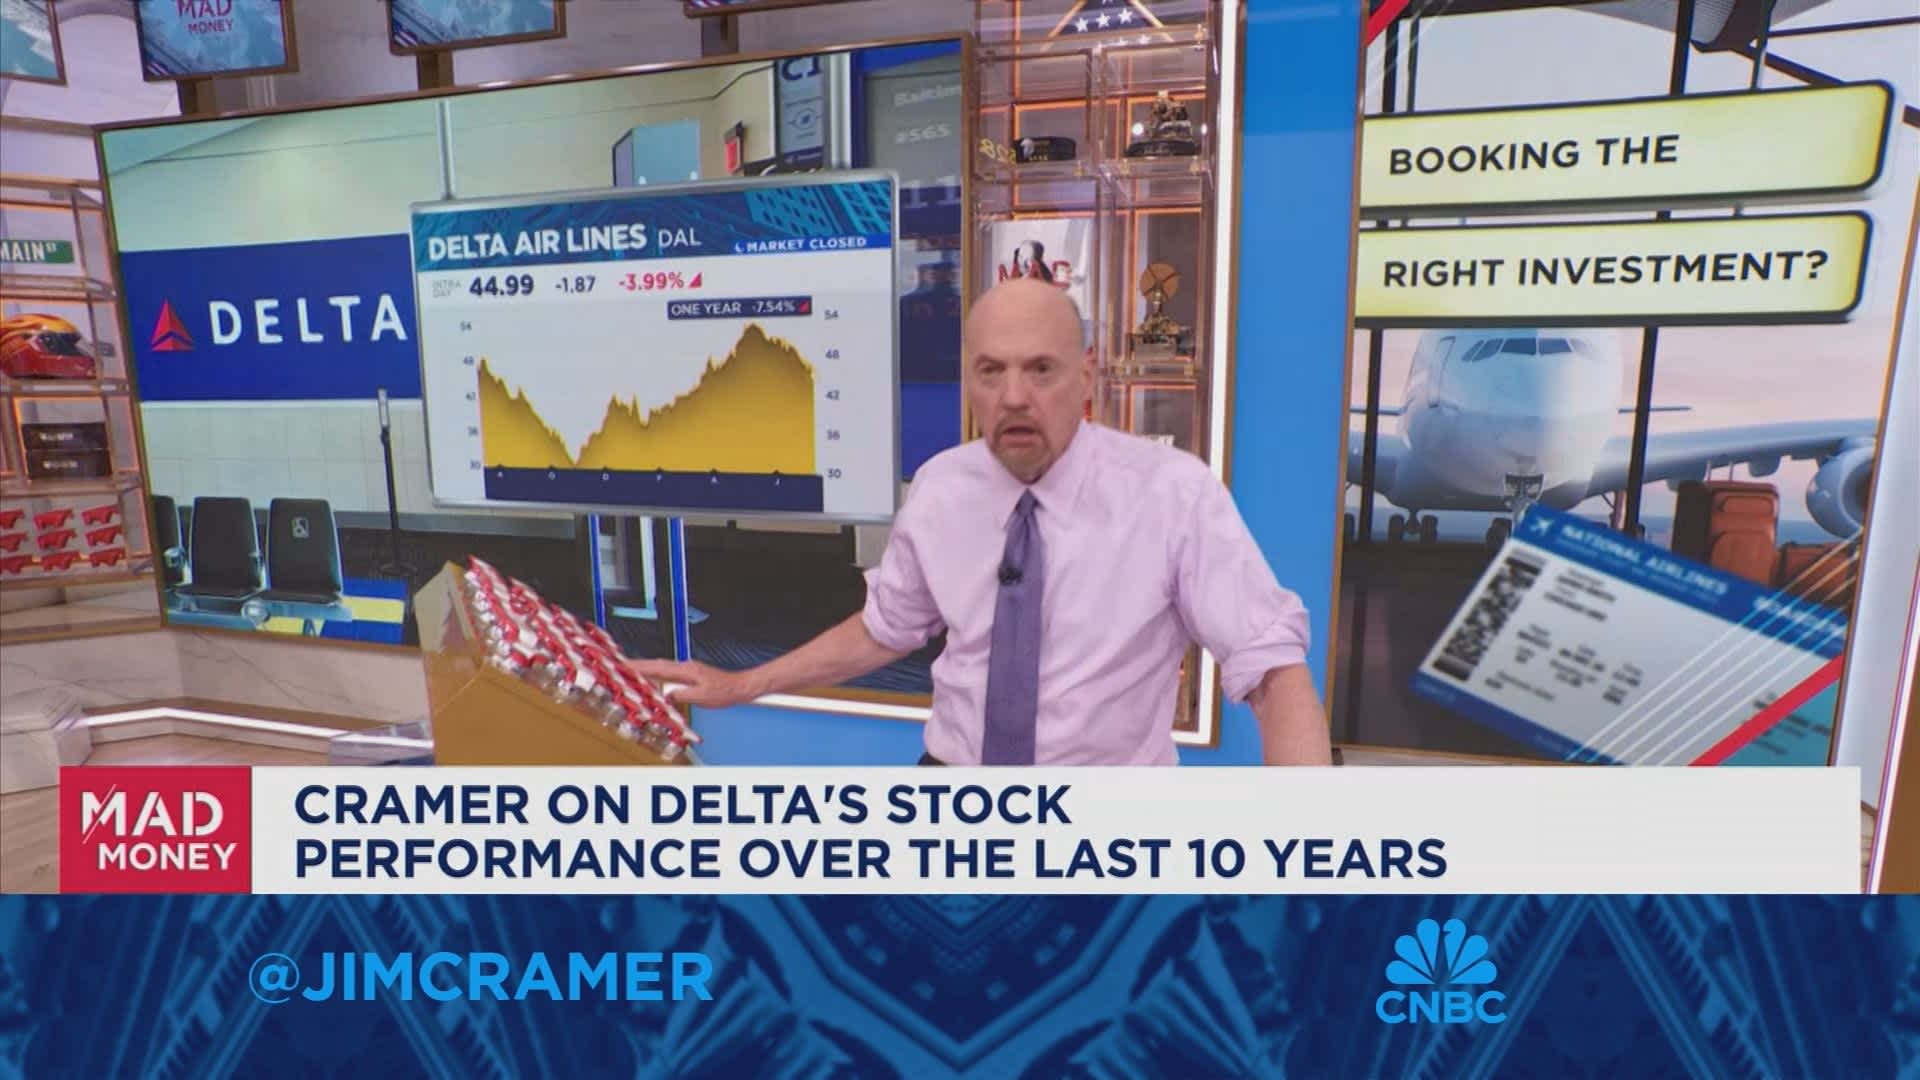 Jim Cramer looks at turbulence in the airline stocks